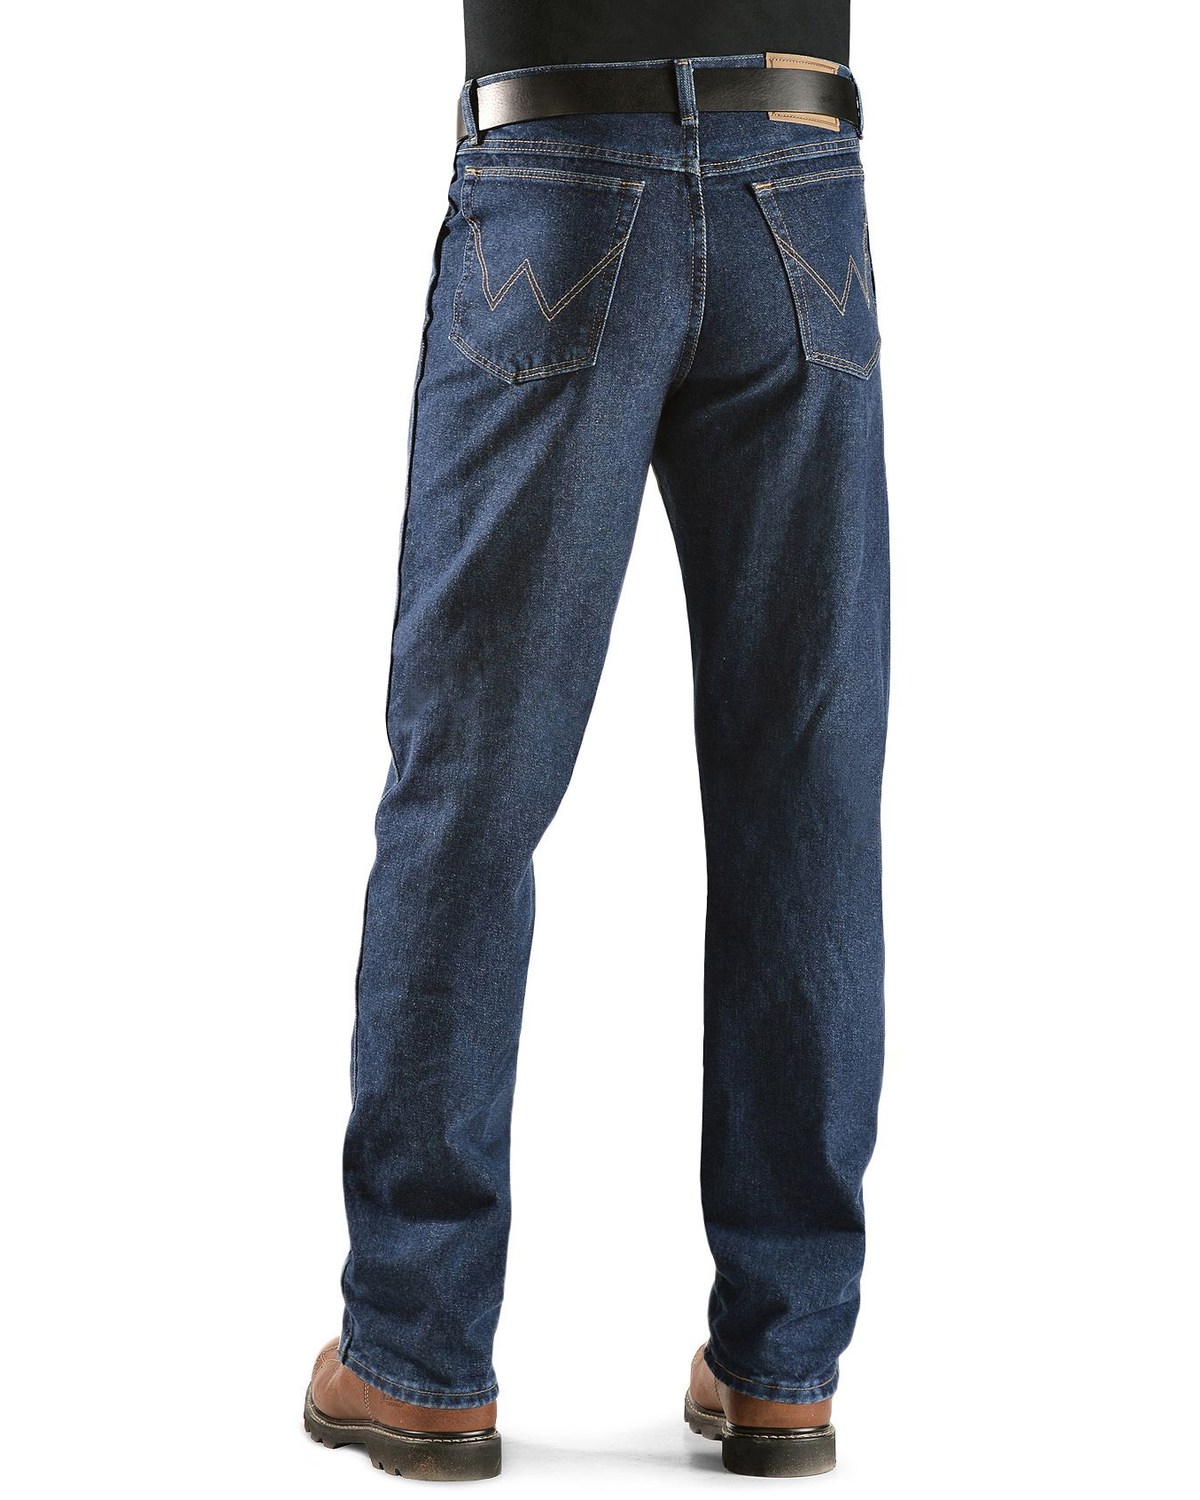 Wrangler Jeans - Rugged Wear Relaxed Fit Big. 44" to 54" Waist